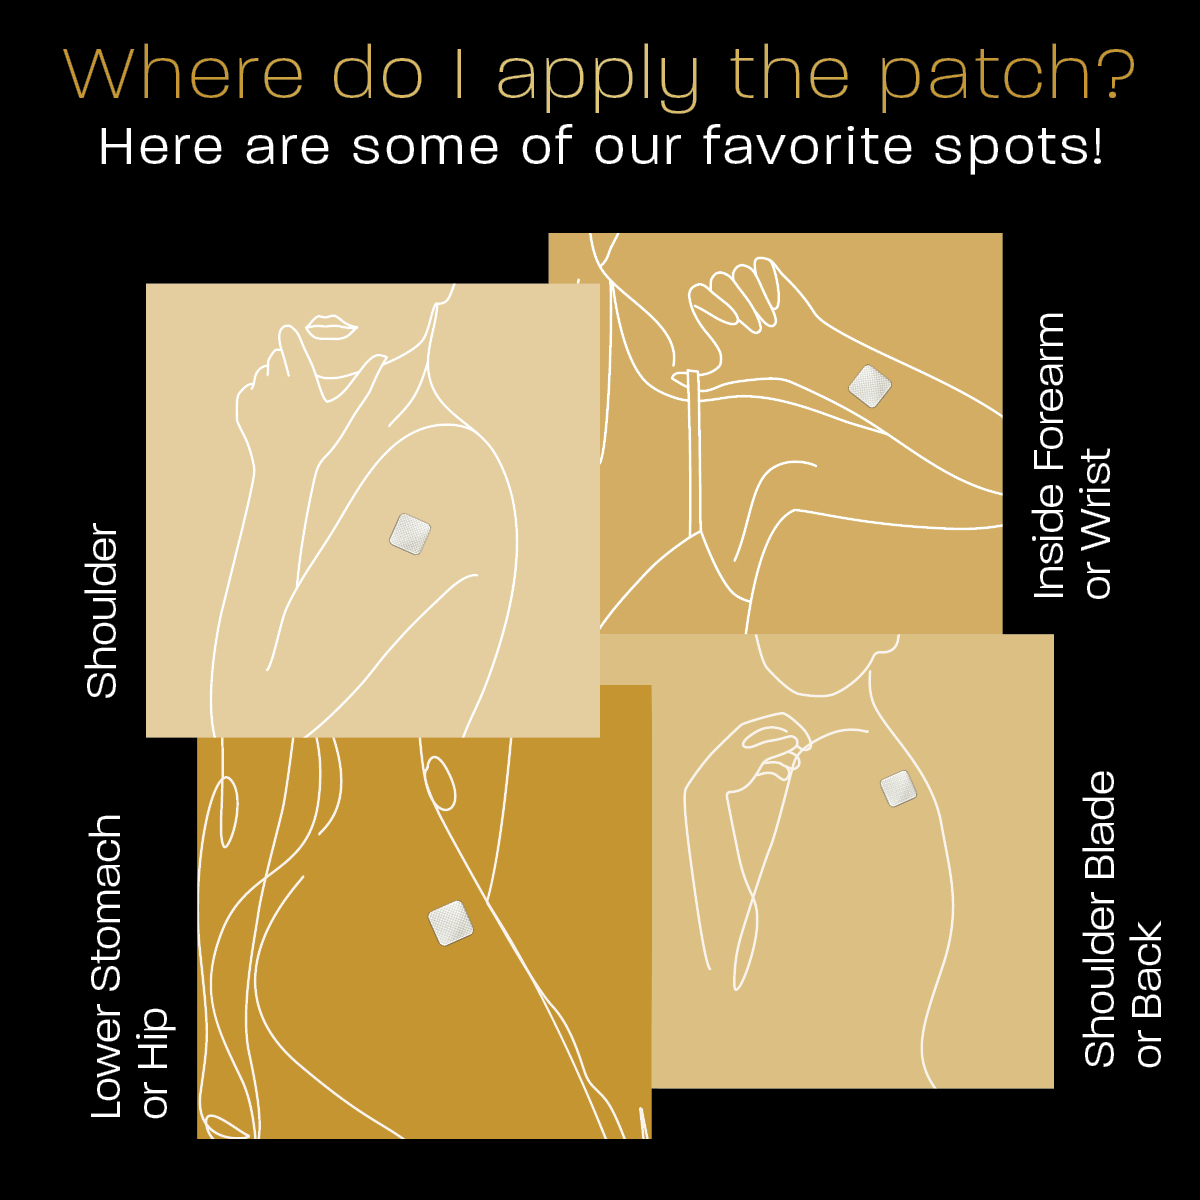 Where do I apply the ProPatch+ patches?